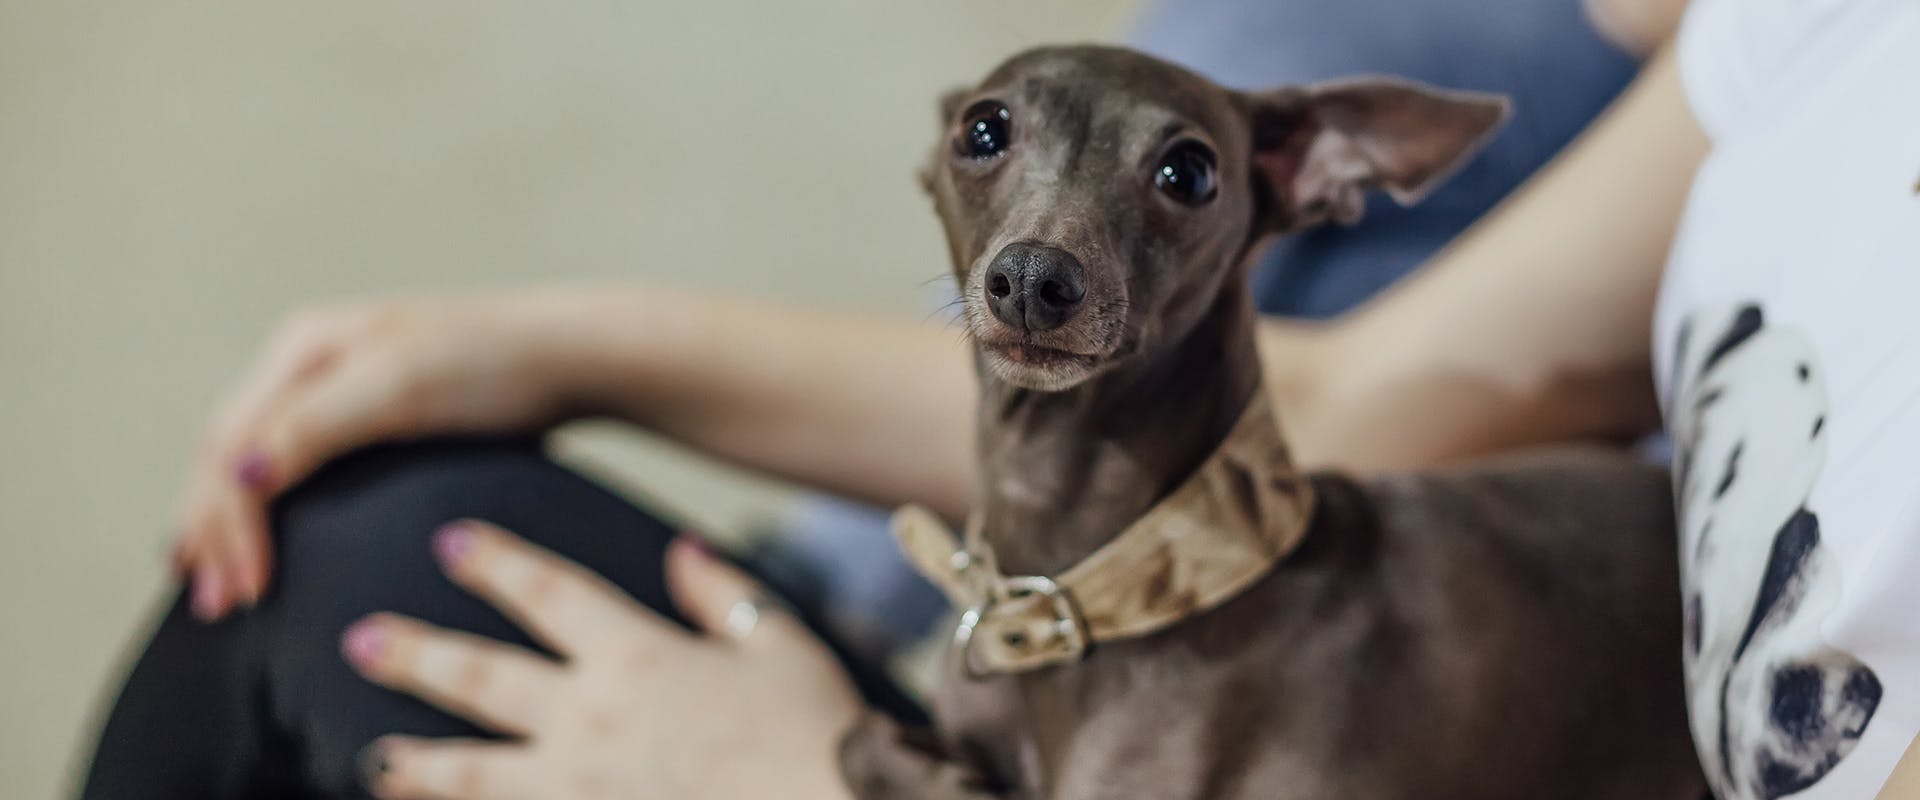 An Italian Greyhound sitting on a person's lap